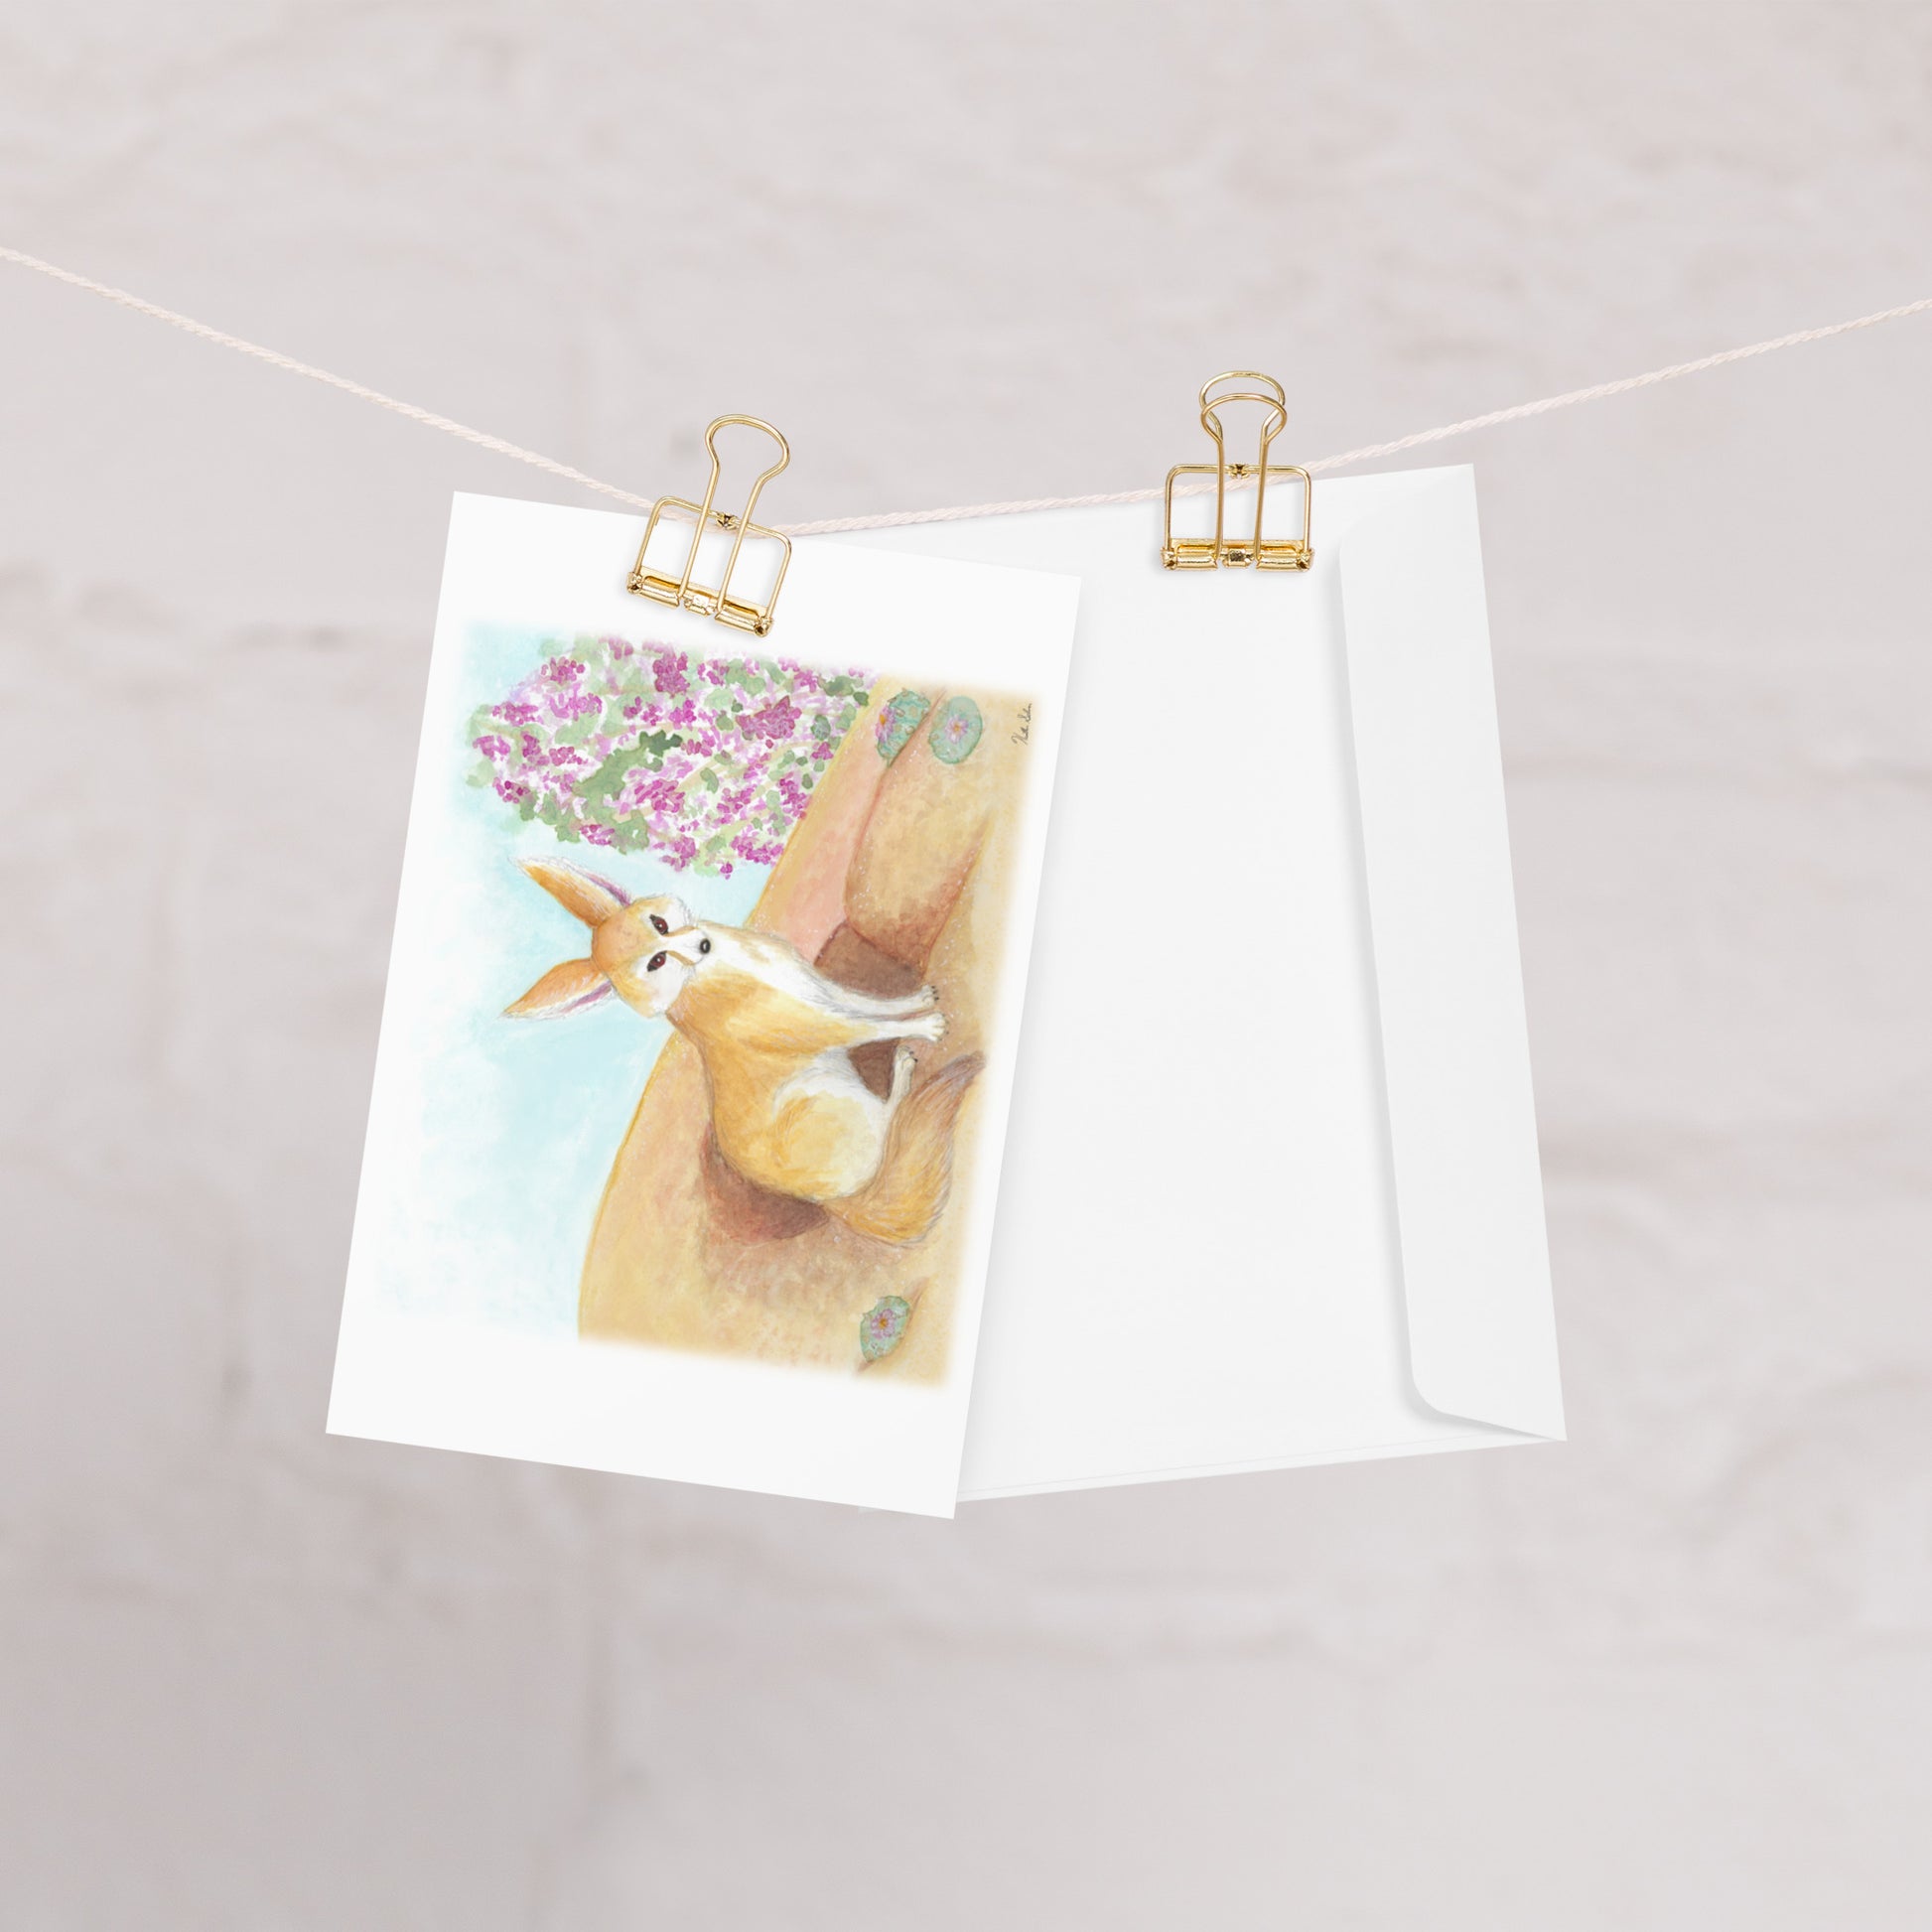 Pack of ten 4 x 6 inch greeting cards. Features watercolor print of fennec fox near it's den in the desert by a jacaranda tree on the front. Inside is blank. Made of coated paperboard. Comes with ten envelopes. One card shown on clothesline with a white envelope.